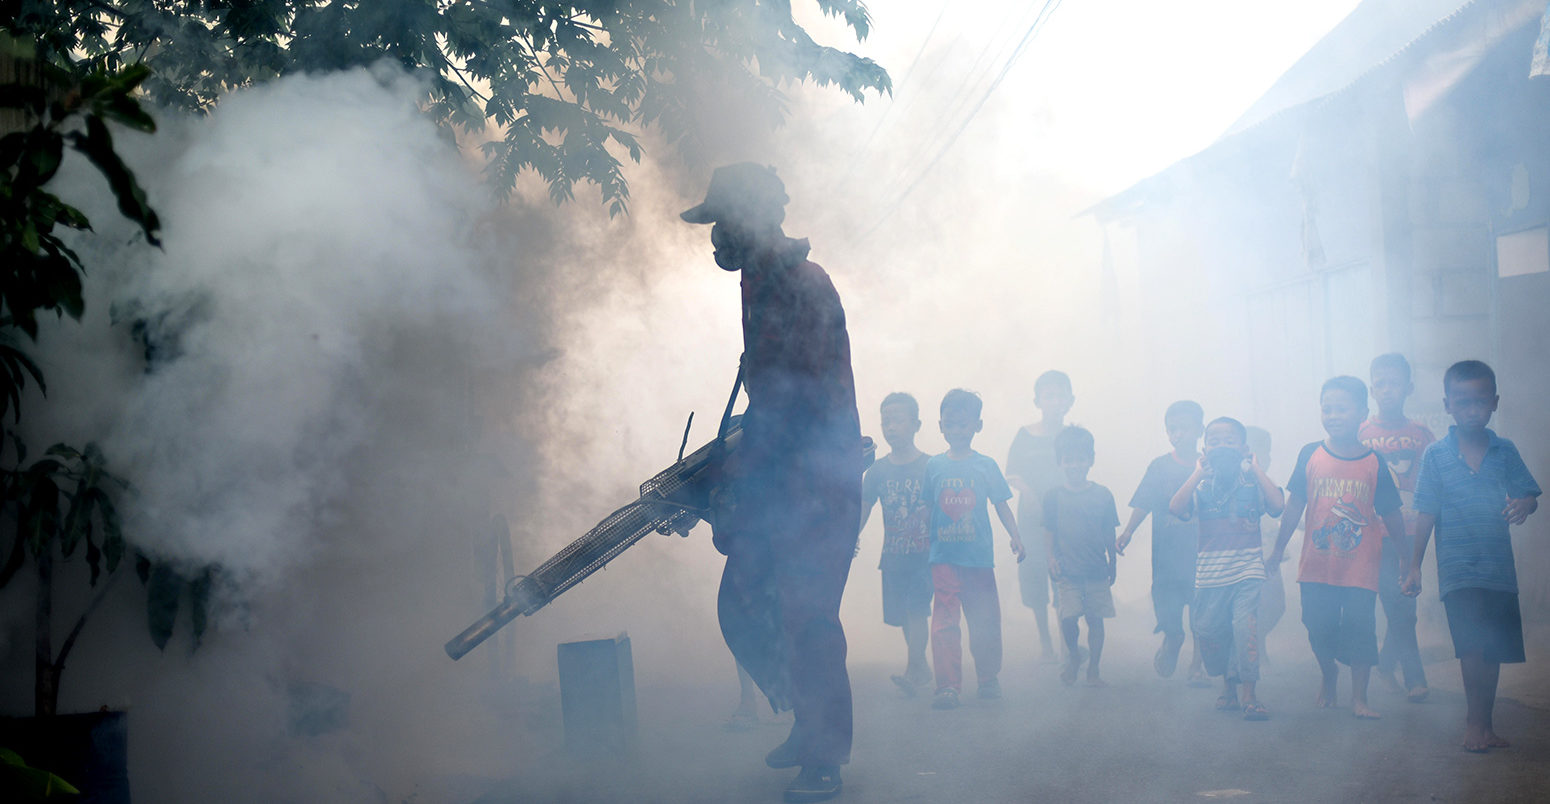 Mosquito fogging to prevent against Dengue fever in Jakarta, Indonesia, 30 March 2015. Credit: Reynold Sumayku / Alamy Stock Photo. EJNEYB